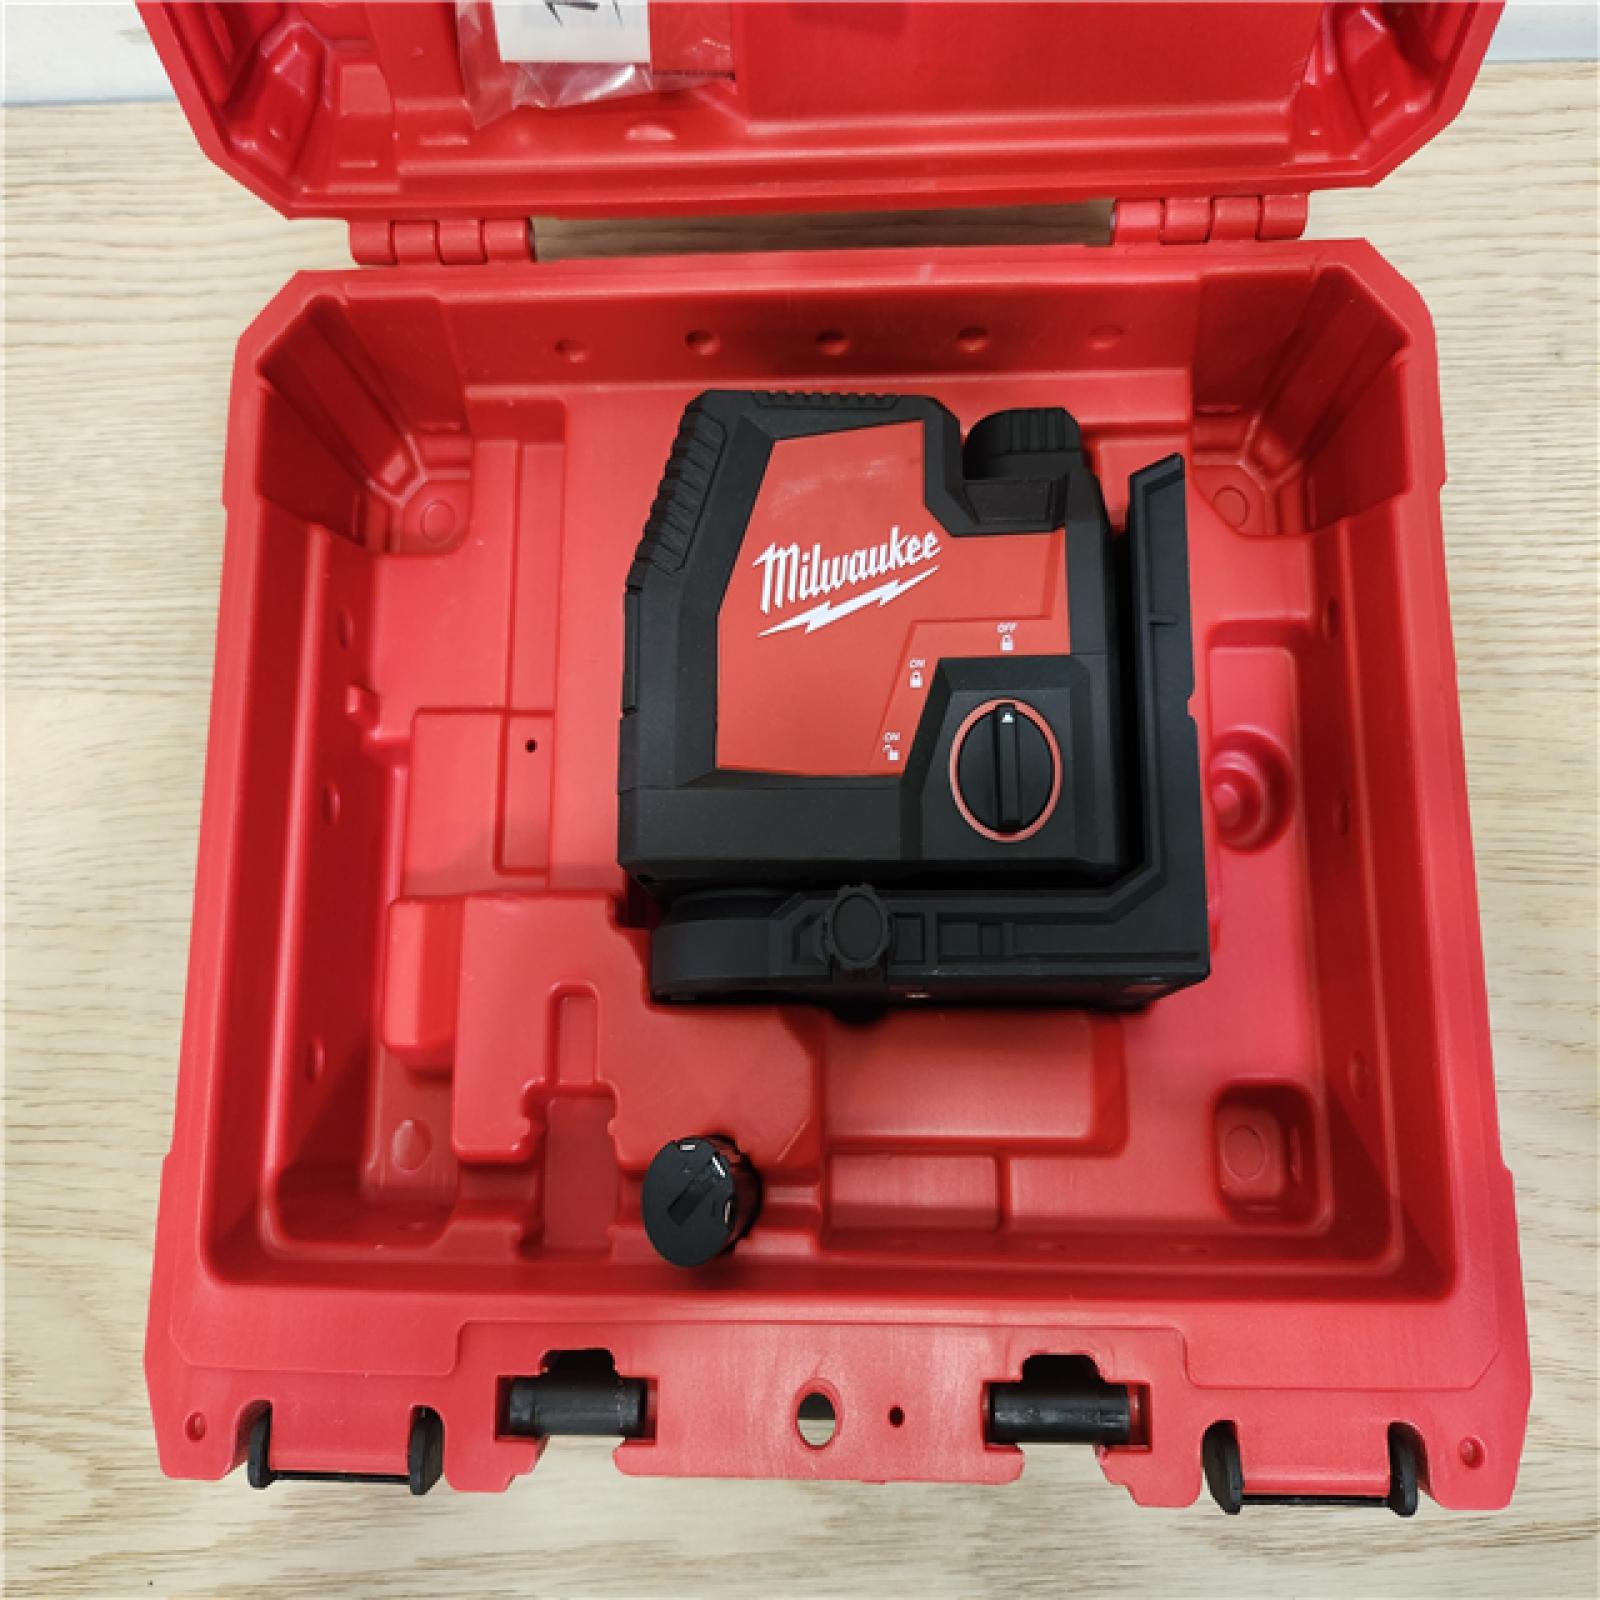 Phoenix Location NEW Milwaukee 100 ft. REDLITHIUM Lithium-Ion USB Green Rechargeable Cross Line Laser Level with Battery  (No Charger)